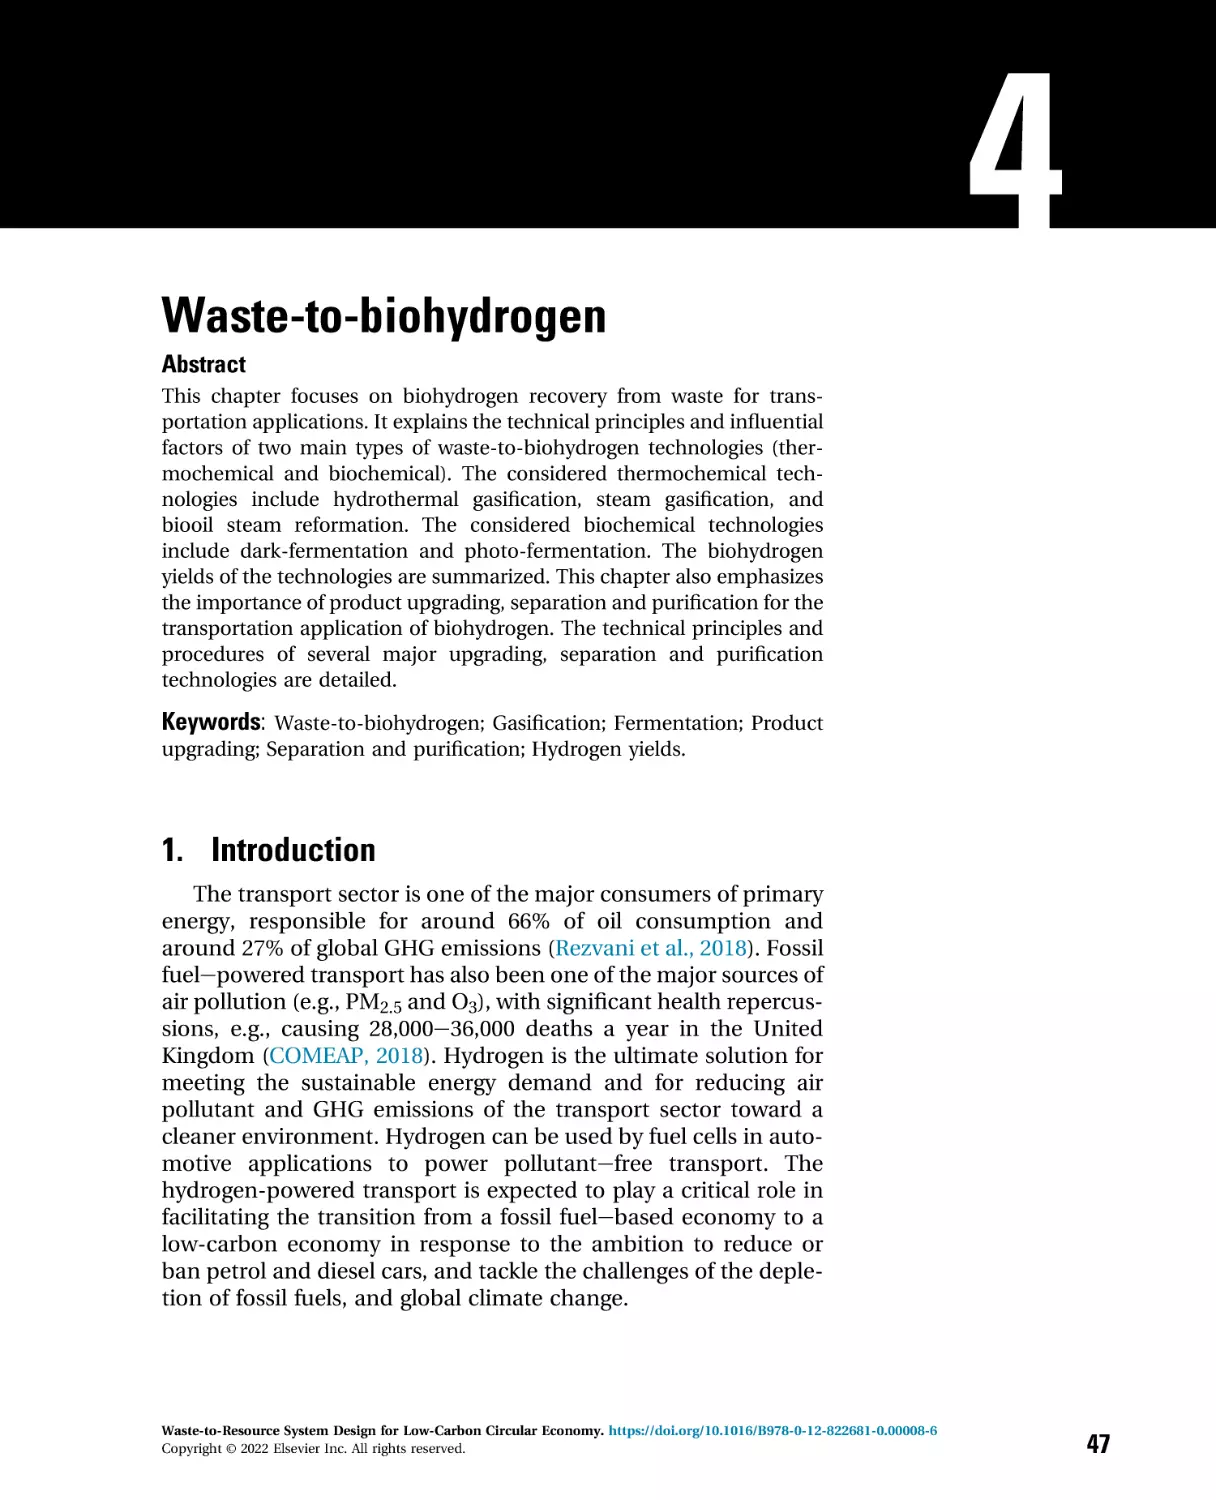 4 - Waste-to-biohydrogen
1. Introduction